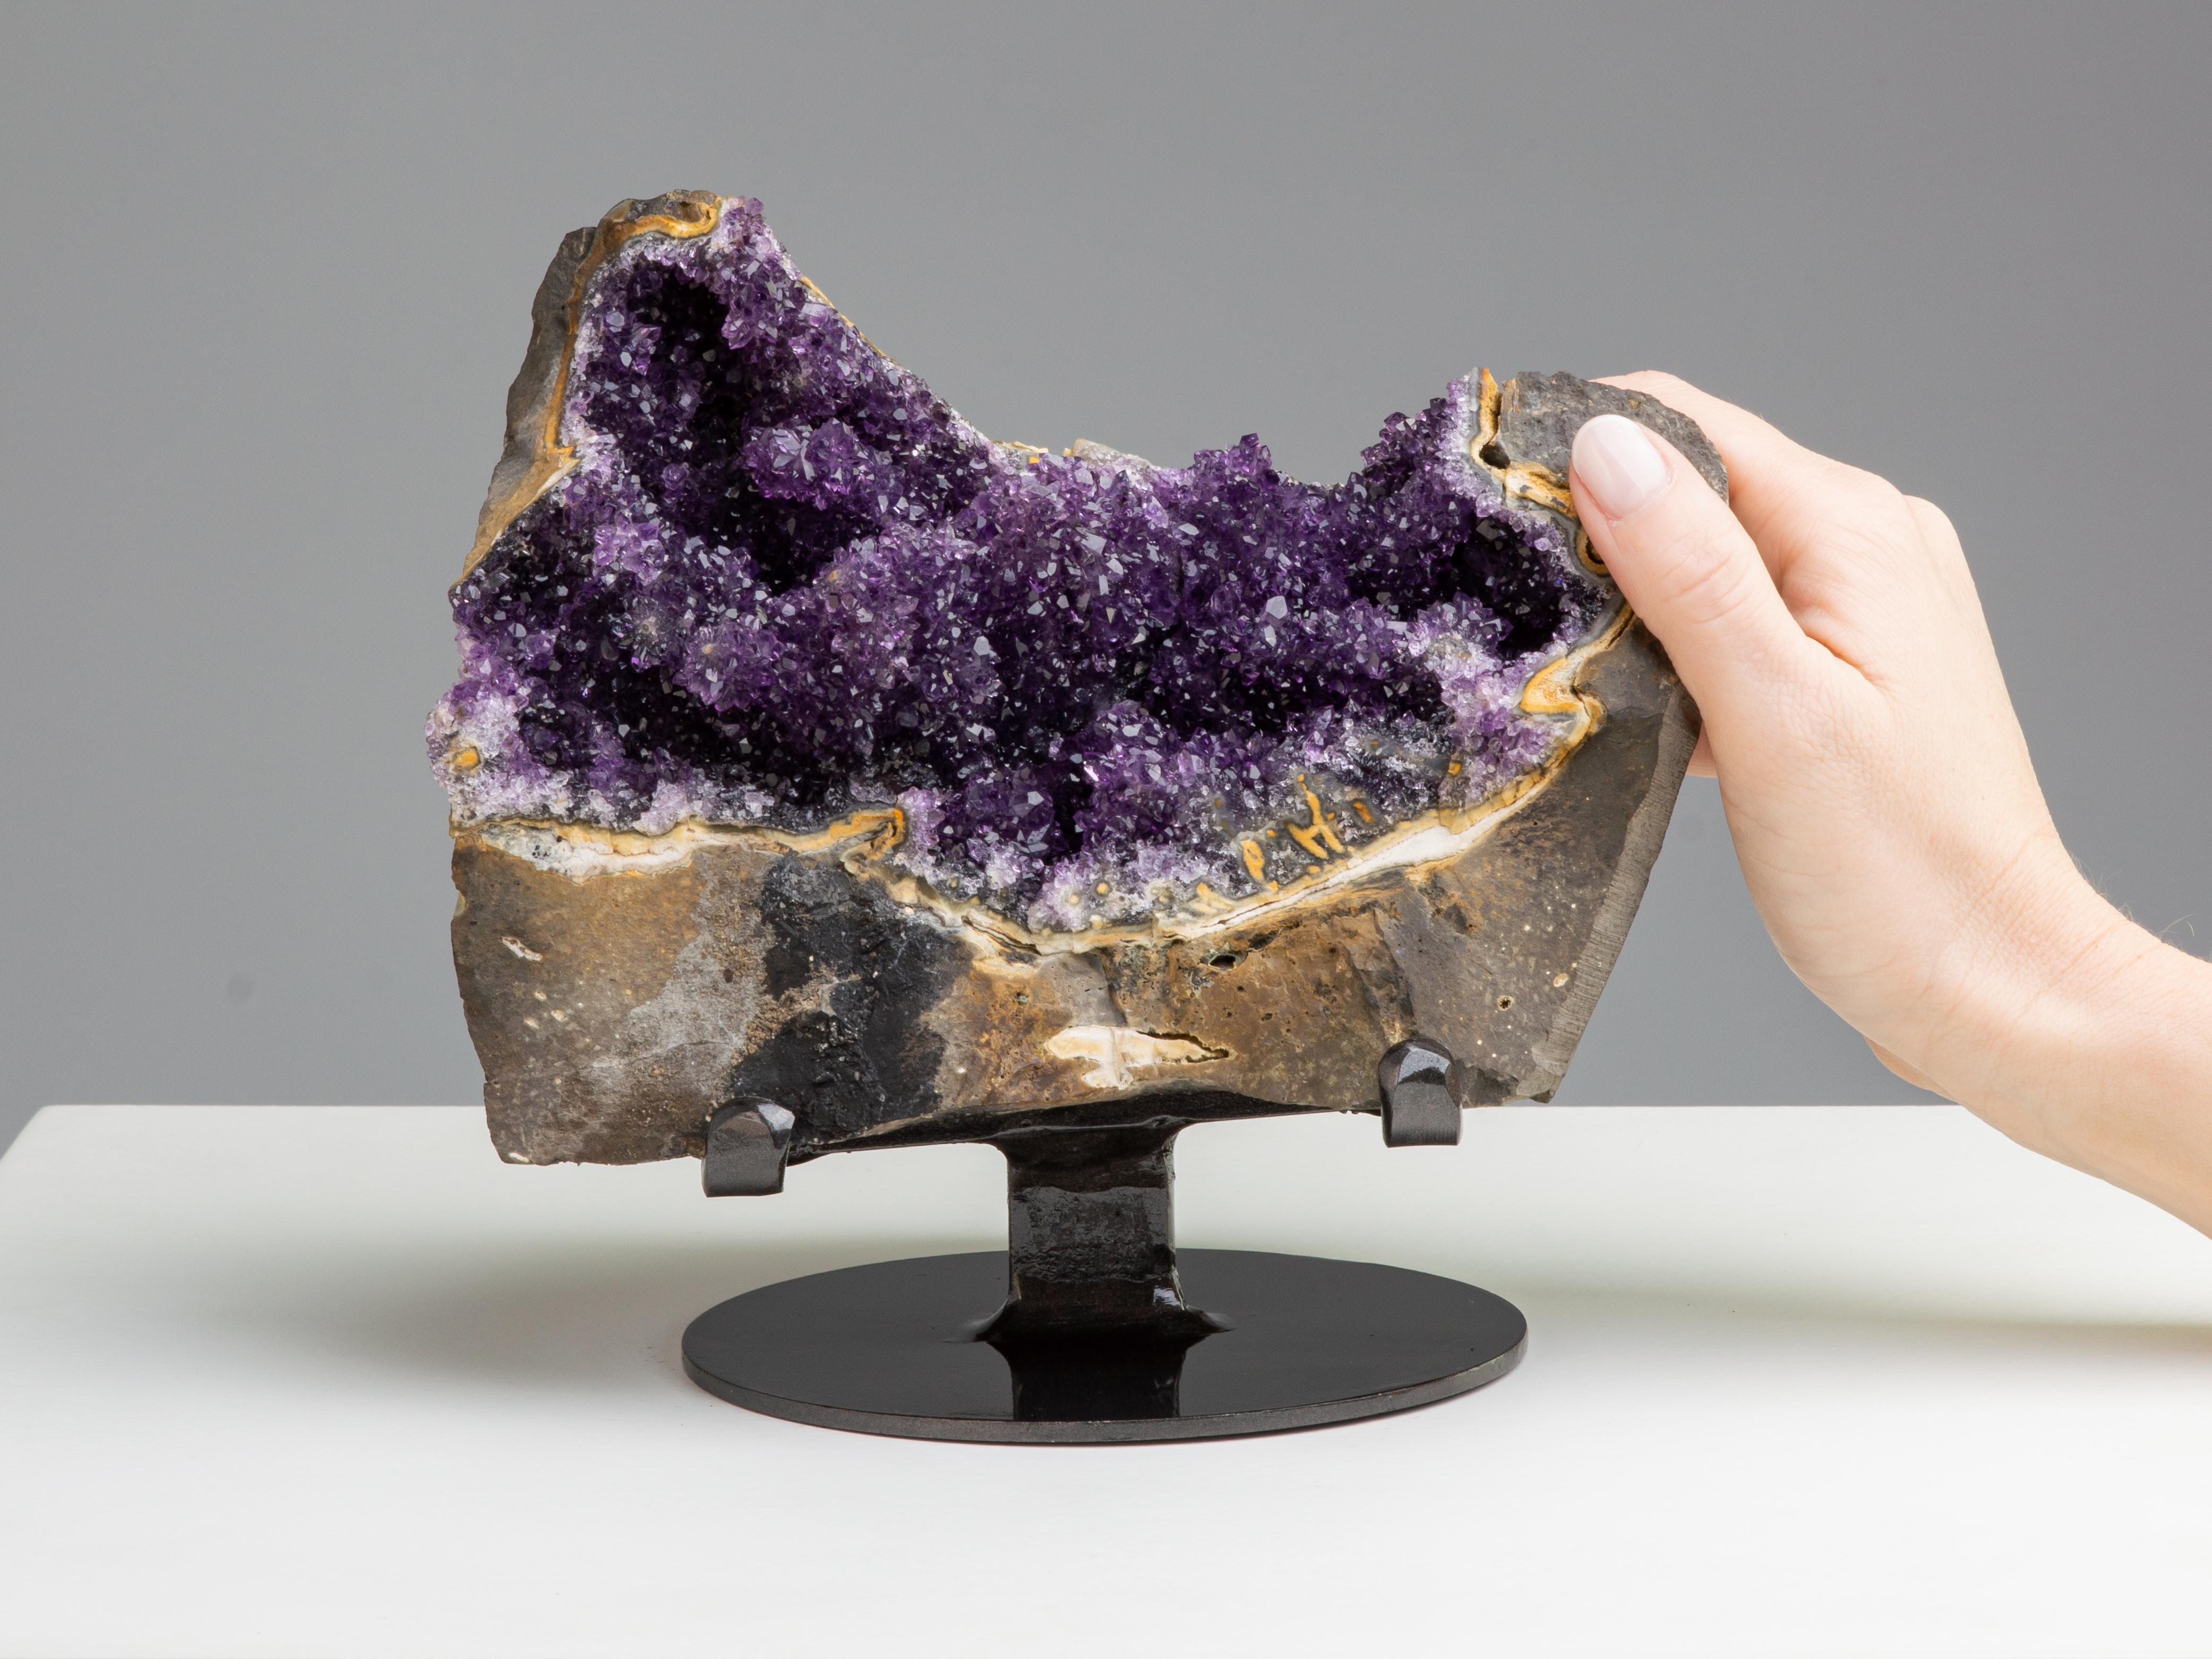 Like a treasure chest, this striking geode section shows the incredible
contrast between the rough volcanic stone (basalt) in which the geodes
are found, and the radiant amethystine quartz crystals they conceal.

This piece was legally and ethically